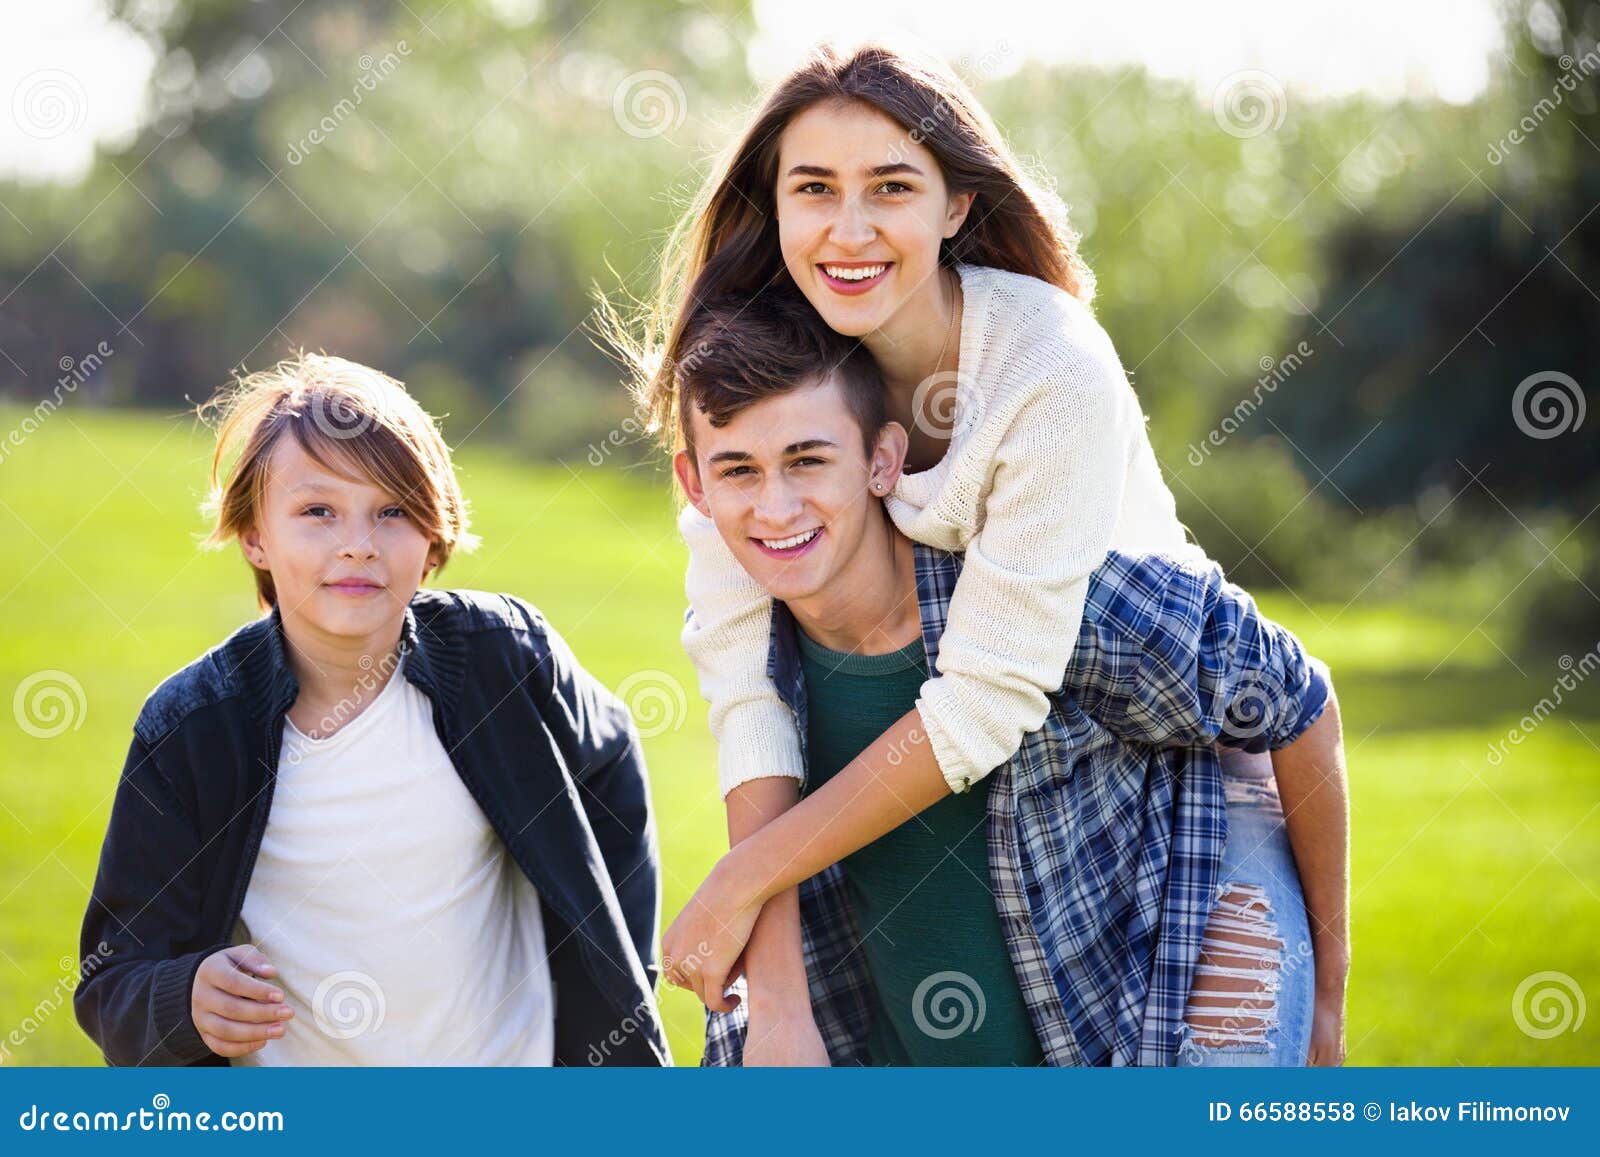 Cheerful Girl with Two Boys Posing in Fall Park Stock Photo - Image of ...